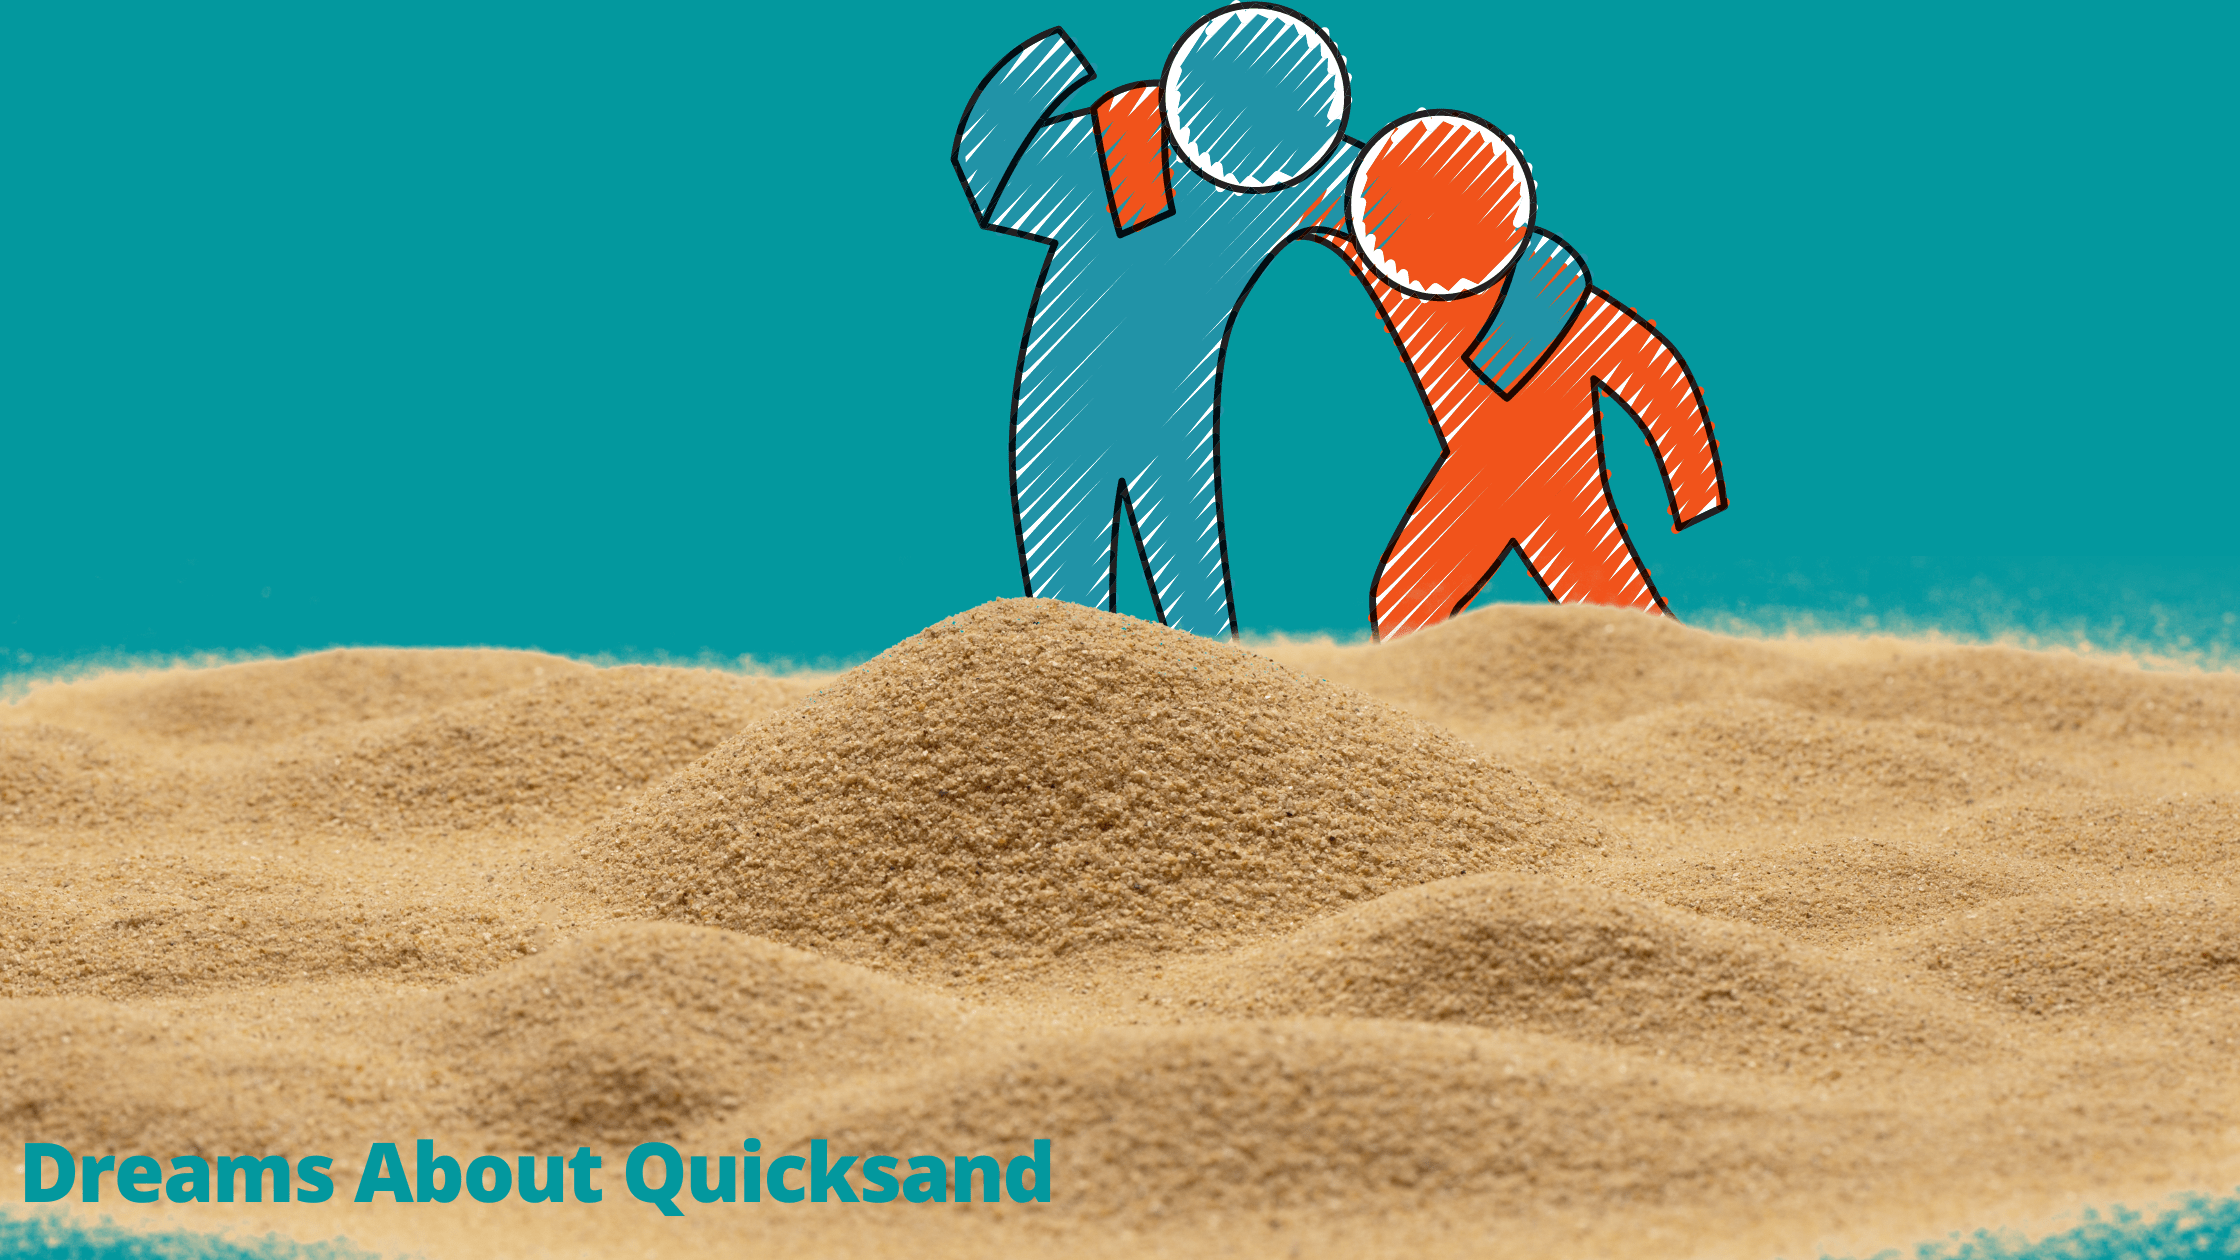 Dreams About Quicksand (1)